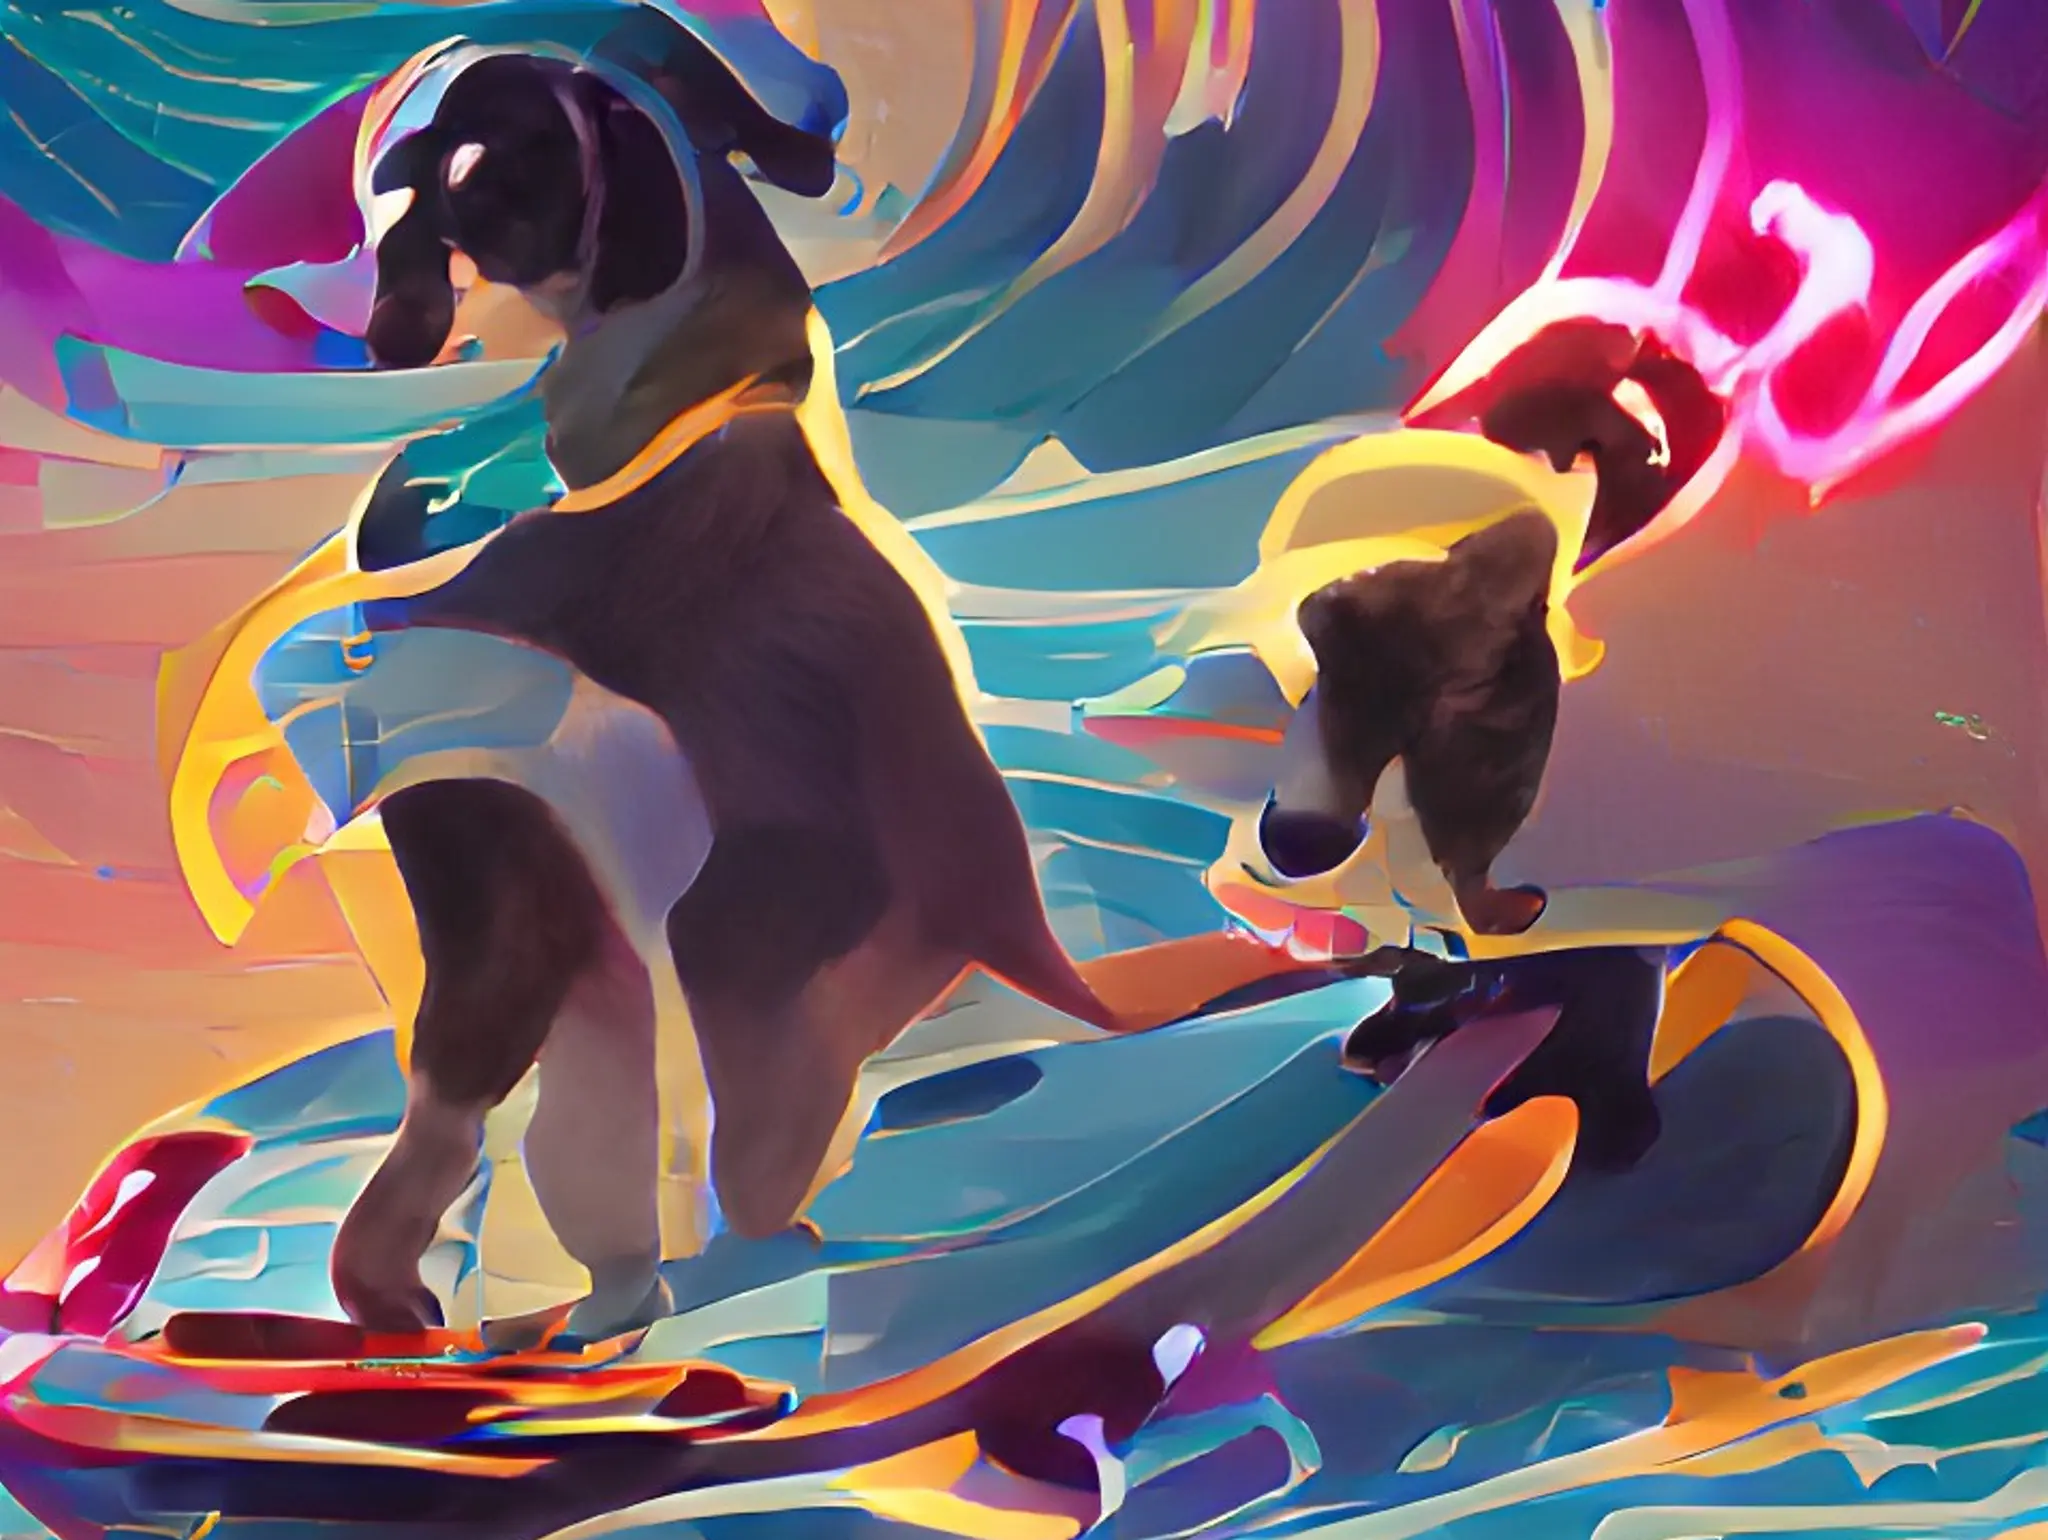 AI Art: "Surfing Dogs"